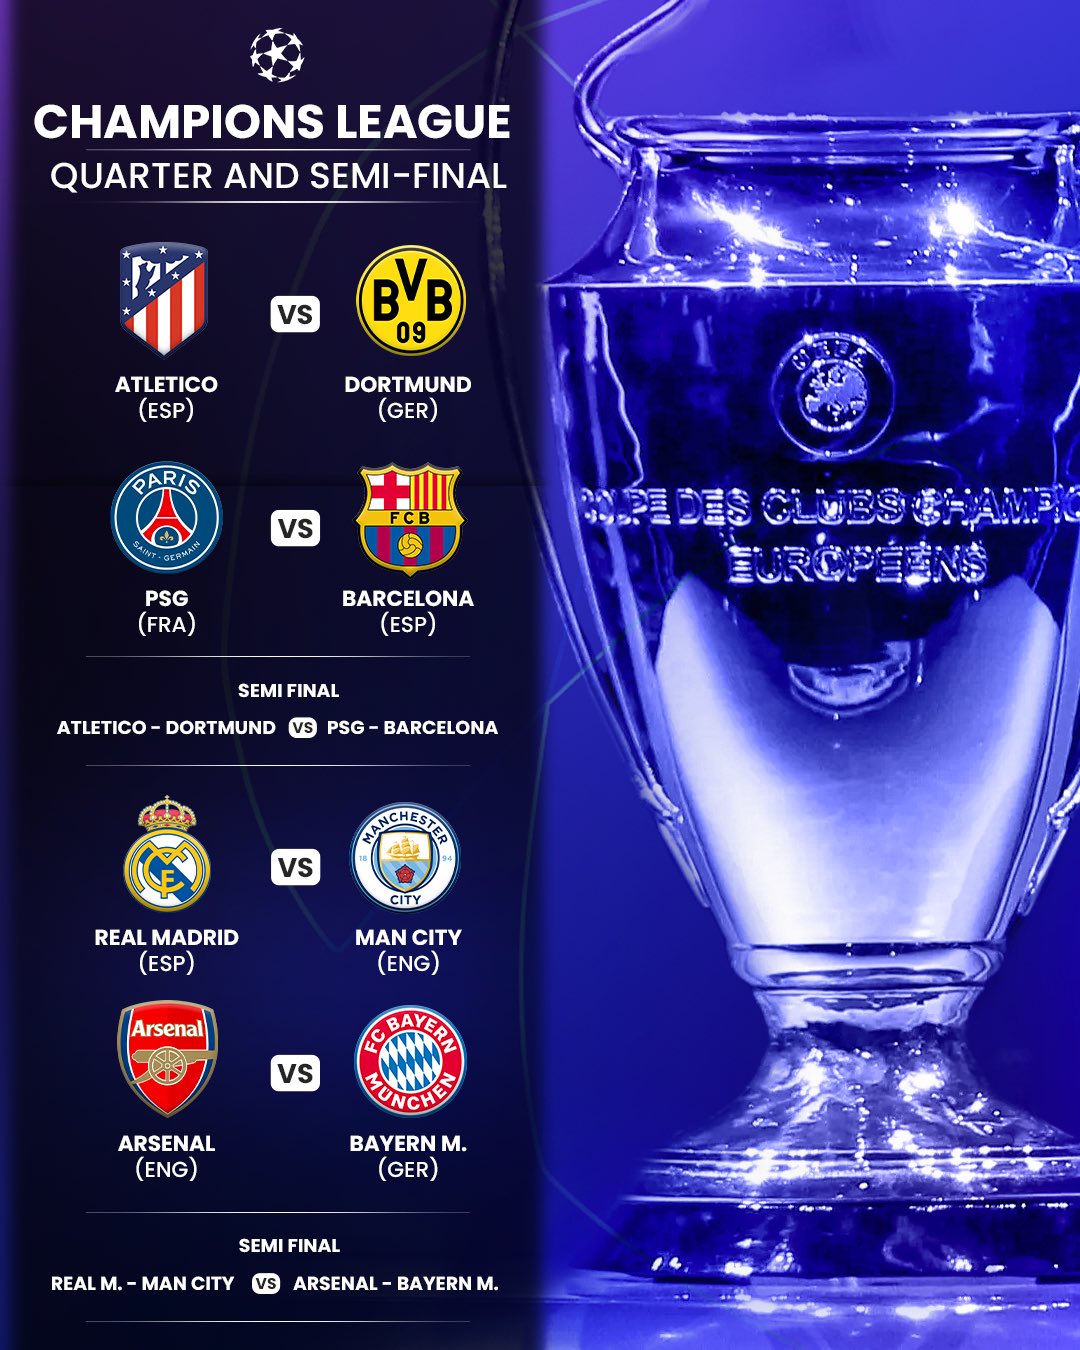 Manchester City to Face Real Madrid, Arsenal Draw Bayern Munich in Champions League Quarter-Finals